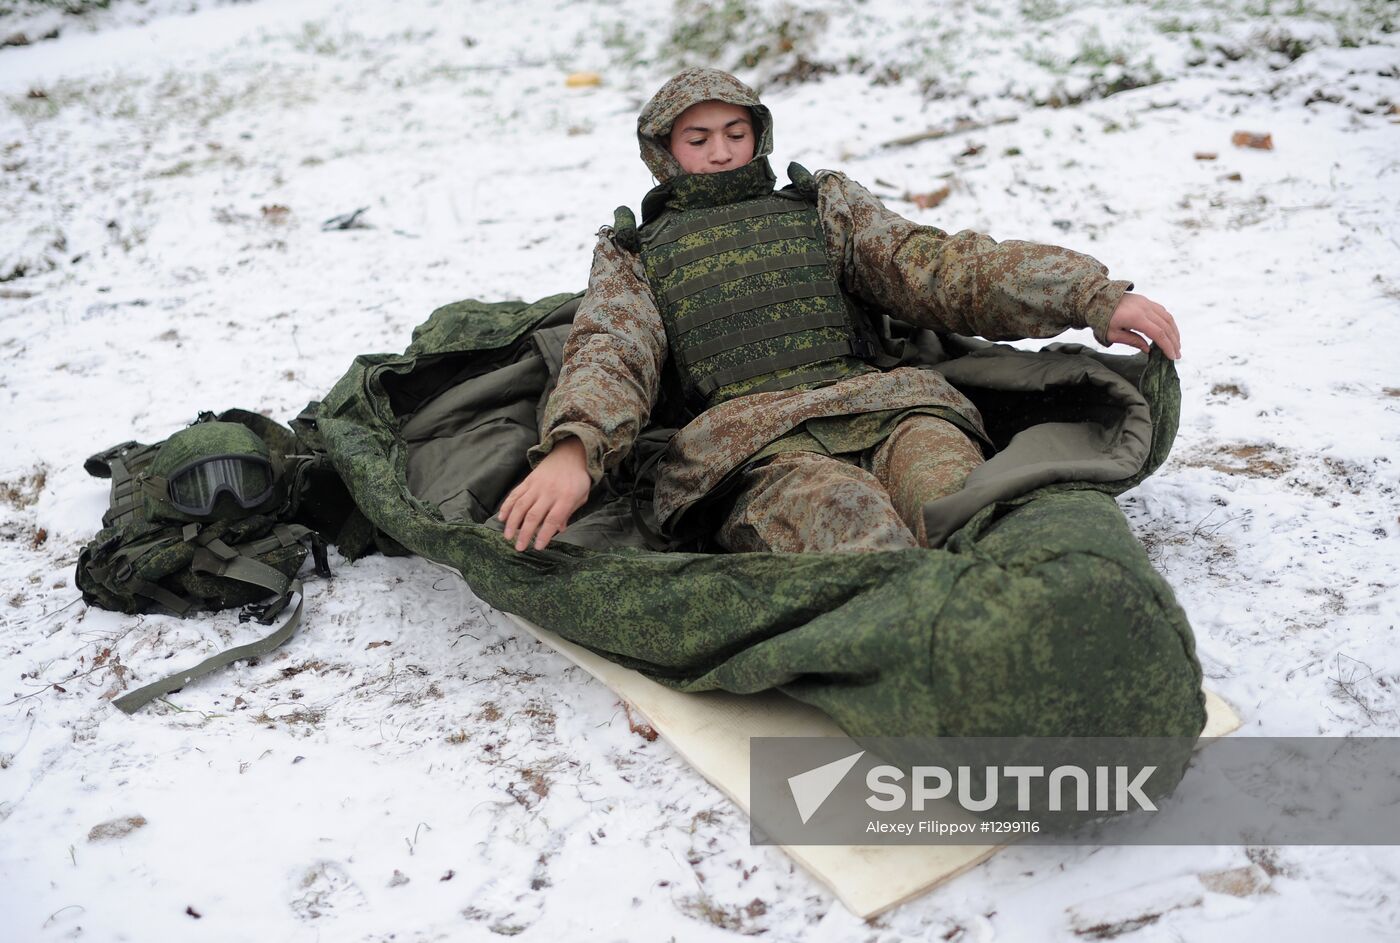 Russian Army troops get new battle suit